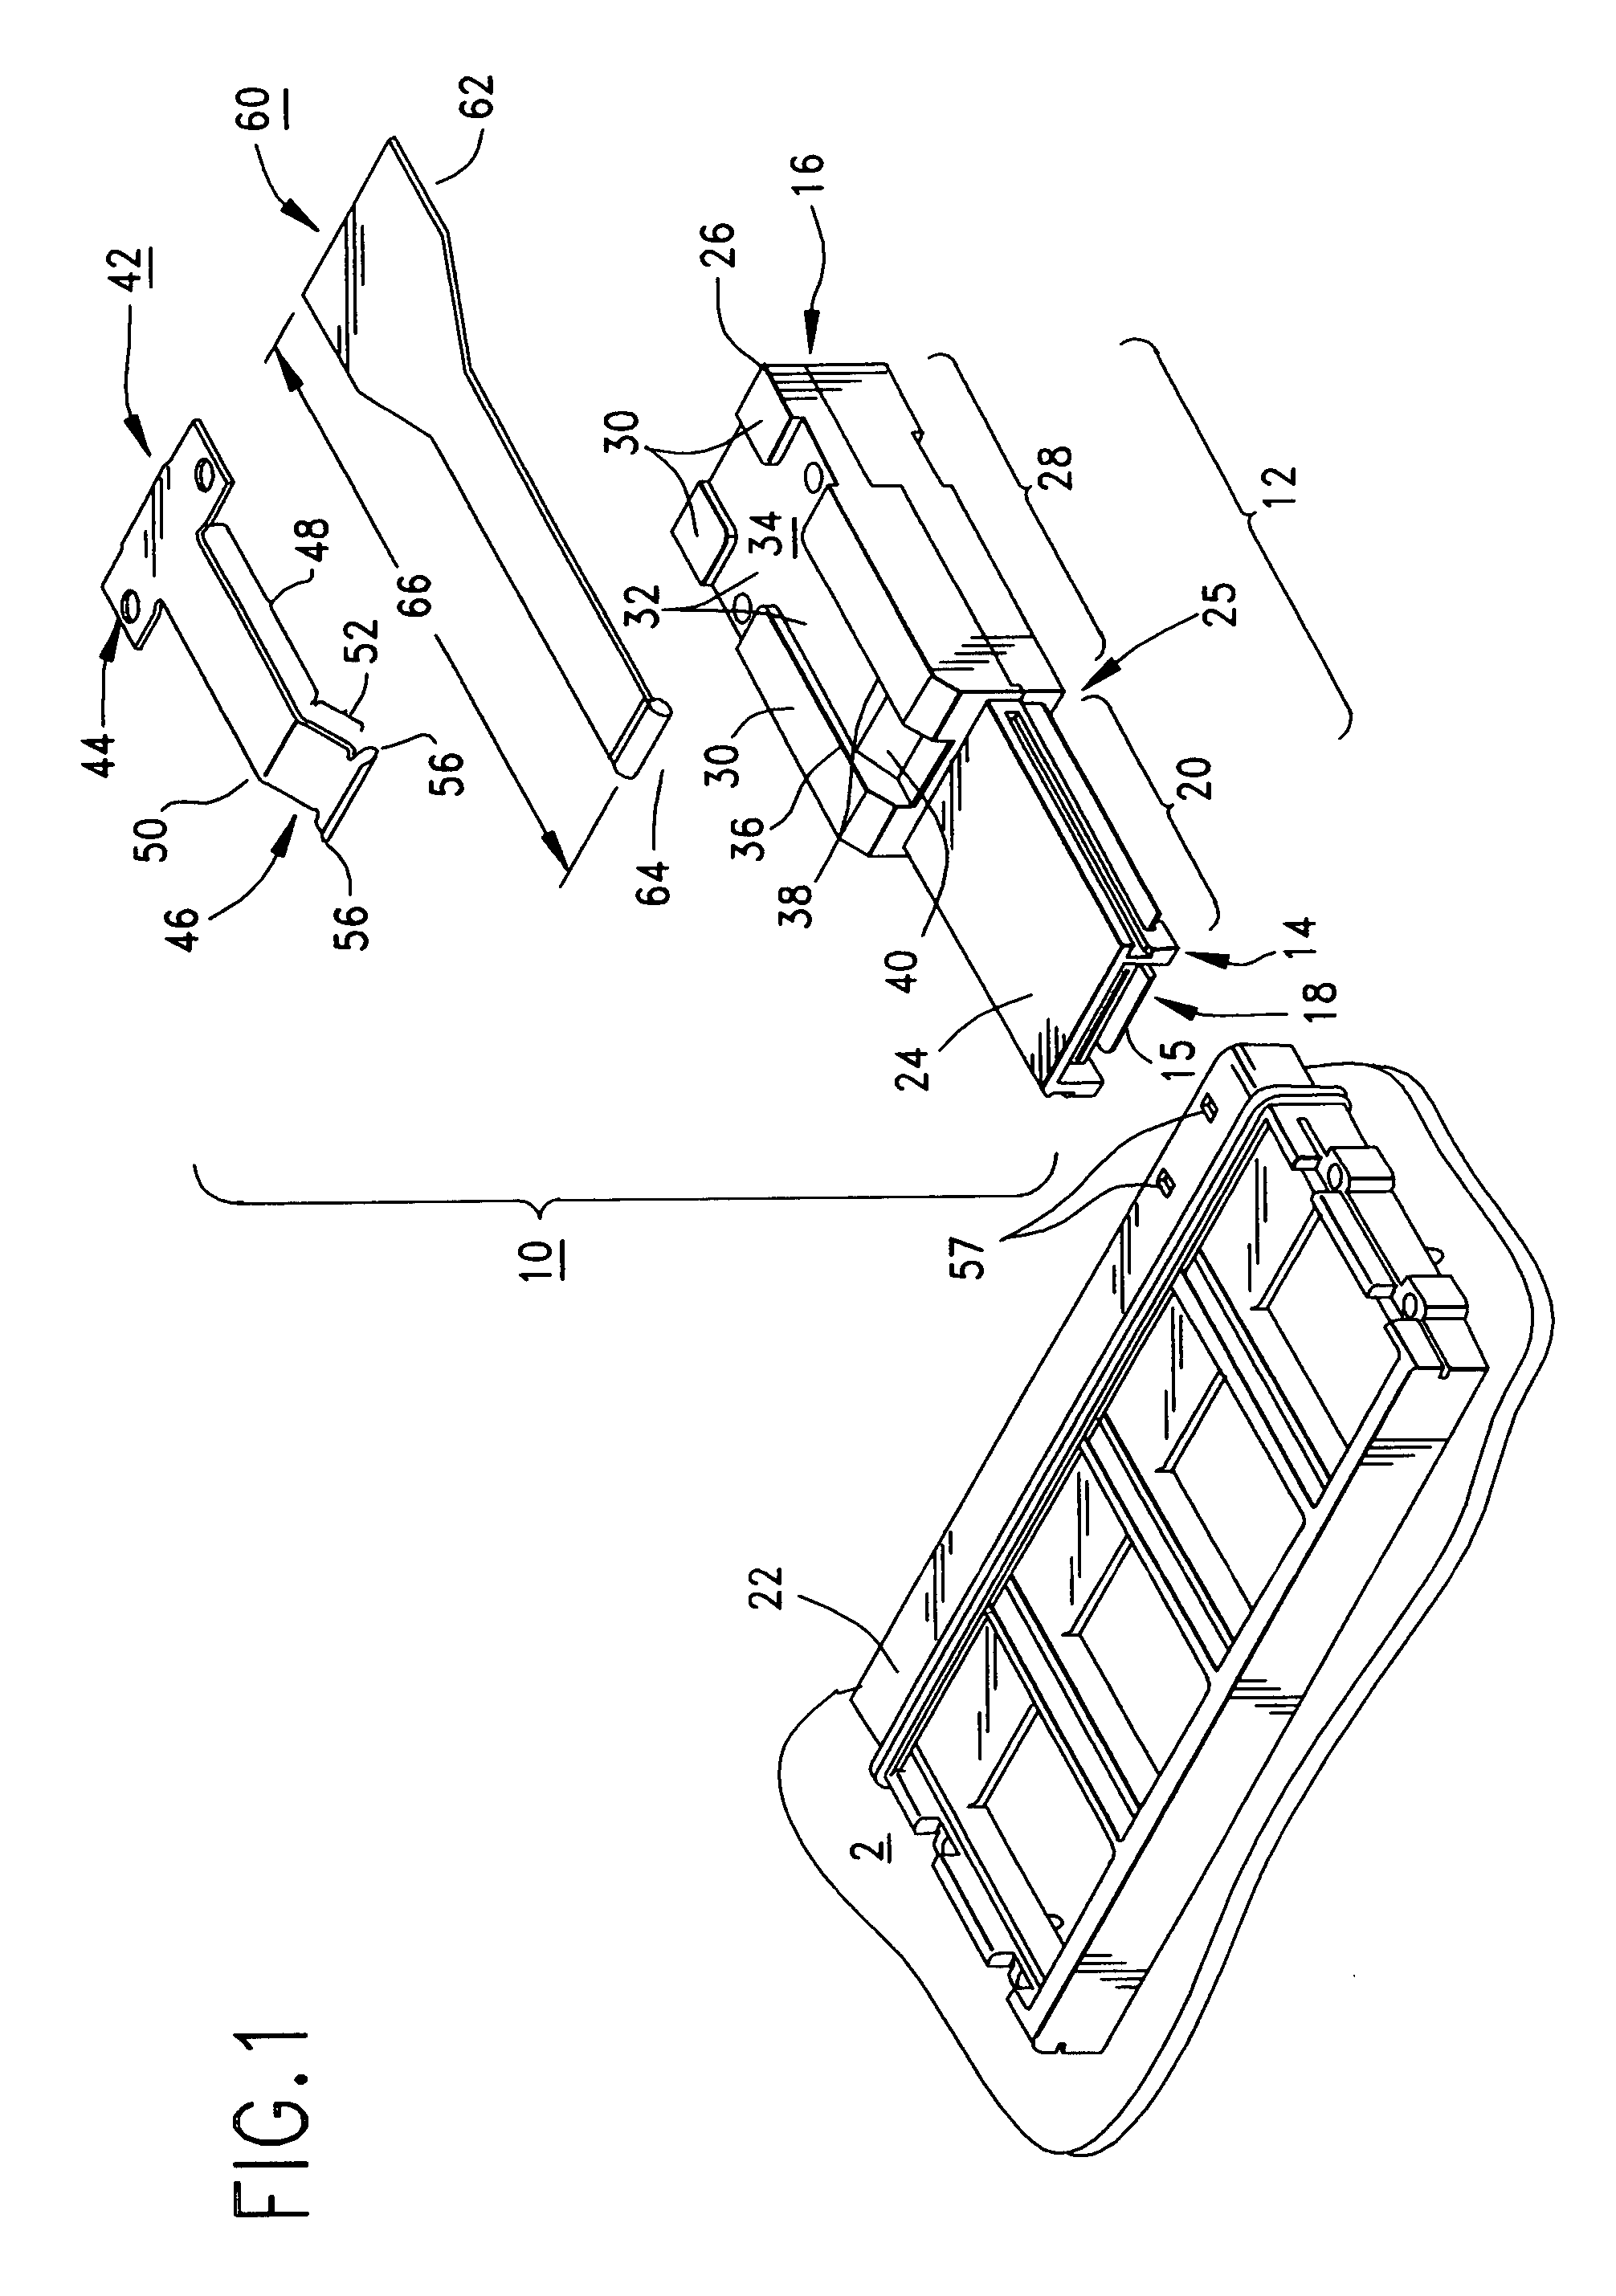 Low profile latching connector and pull tab for unlatching same